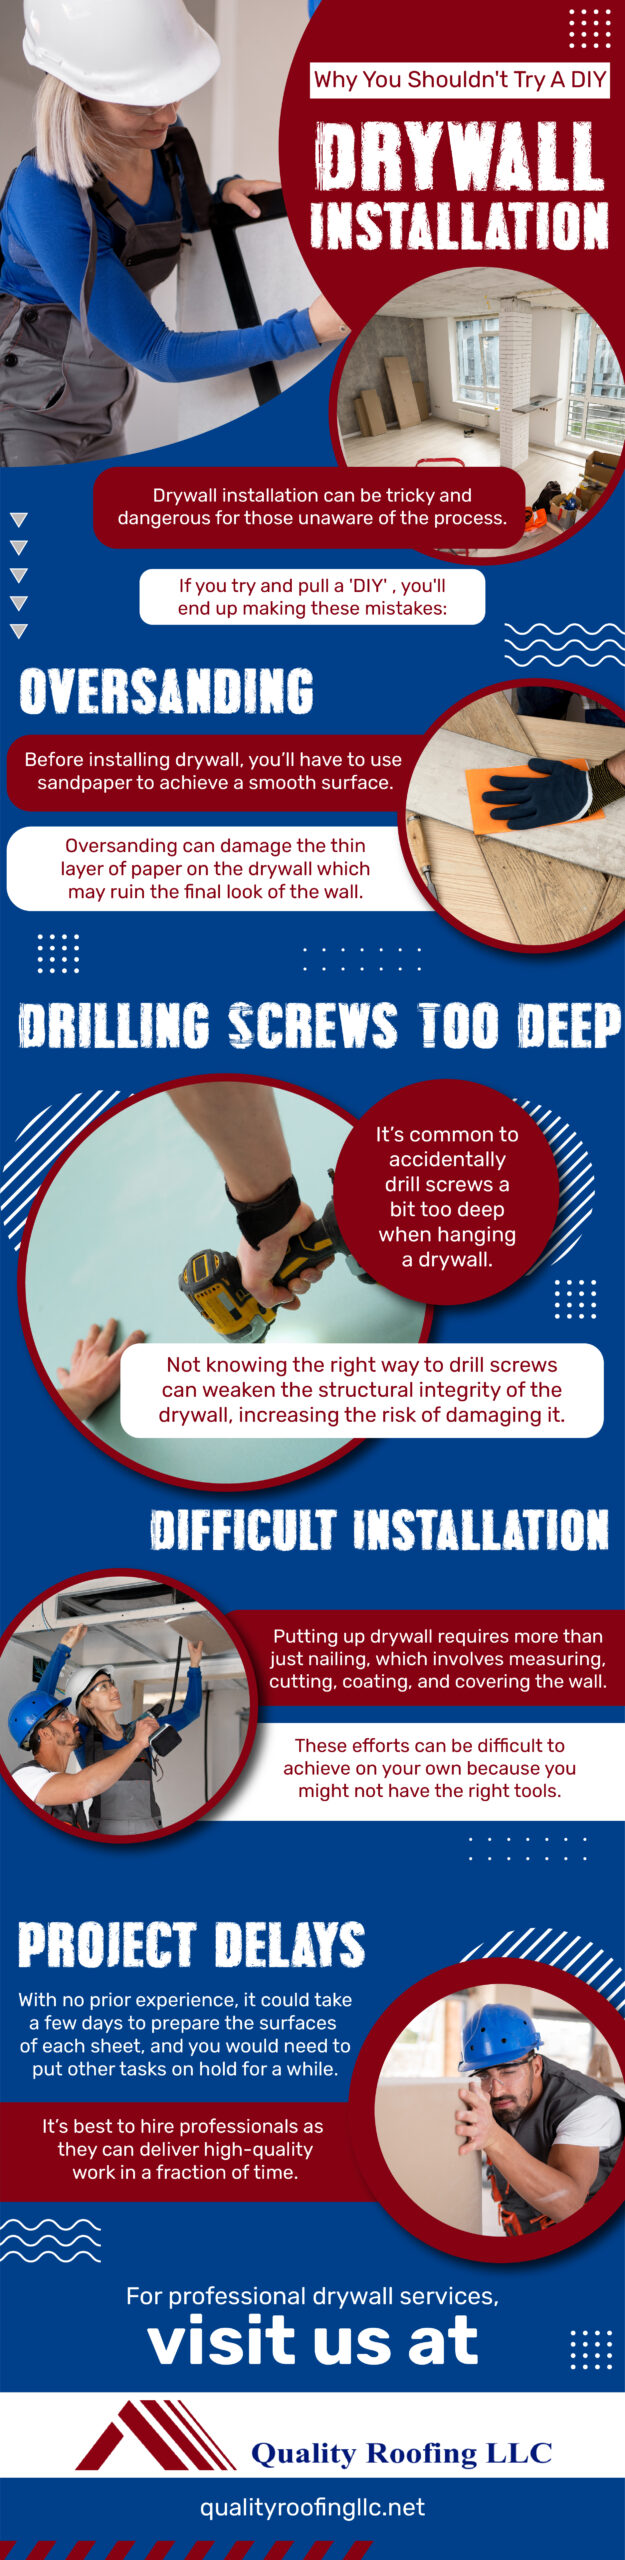 Why Shouldn't You Try A DIY DryWall Installation - Infograph